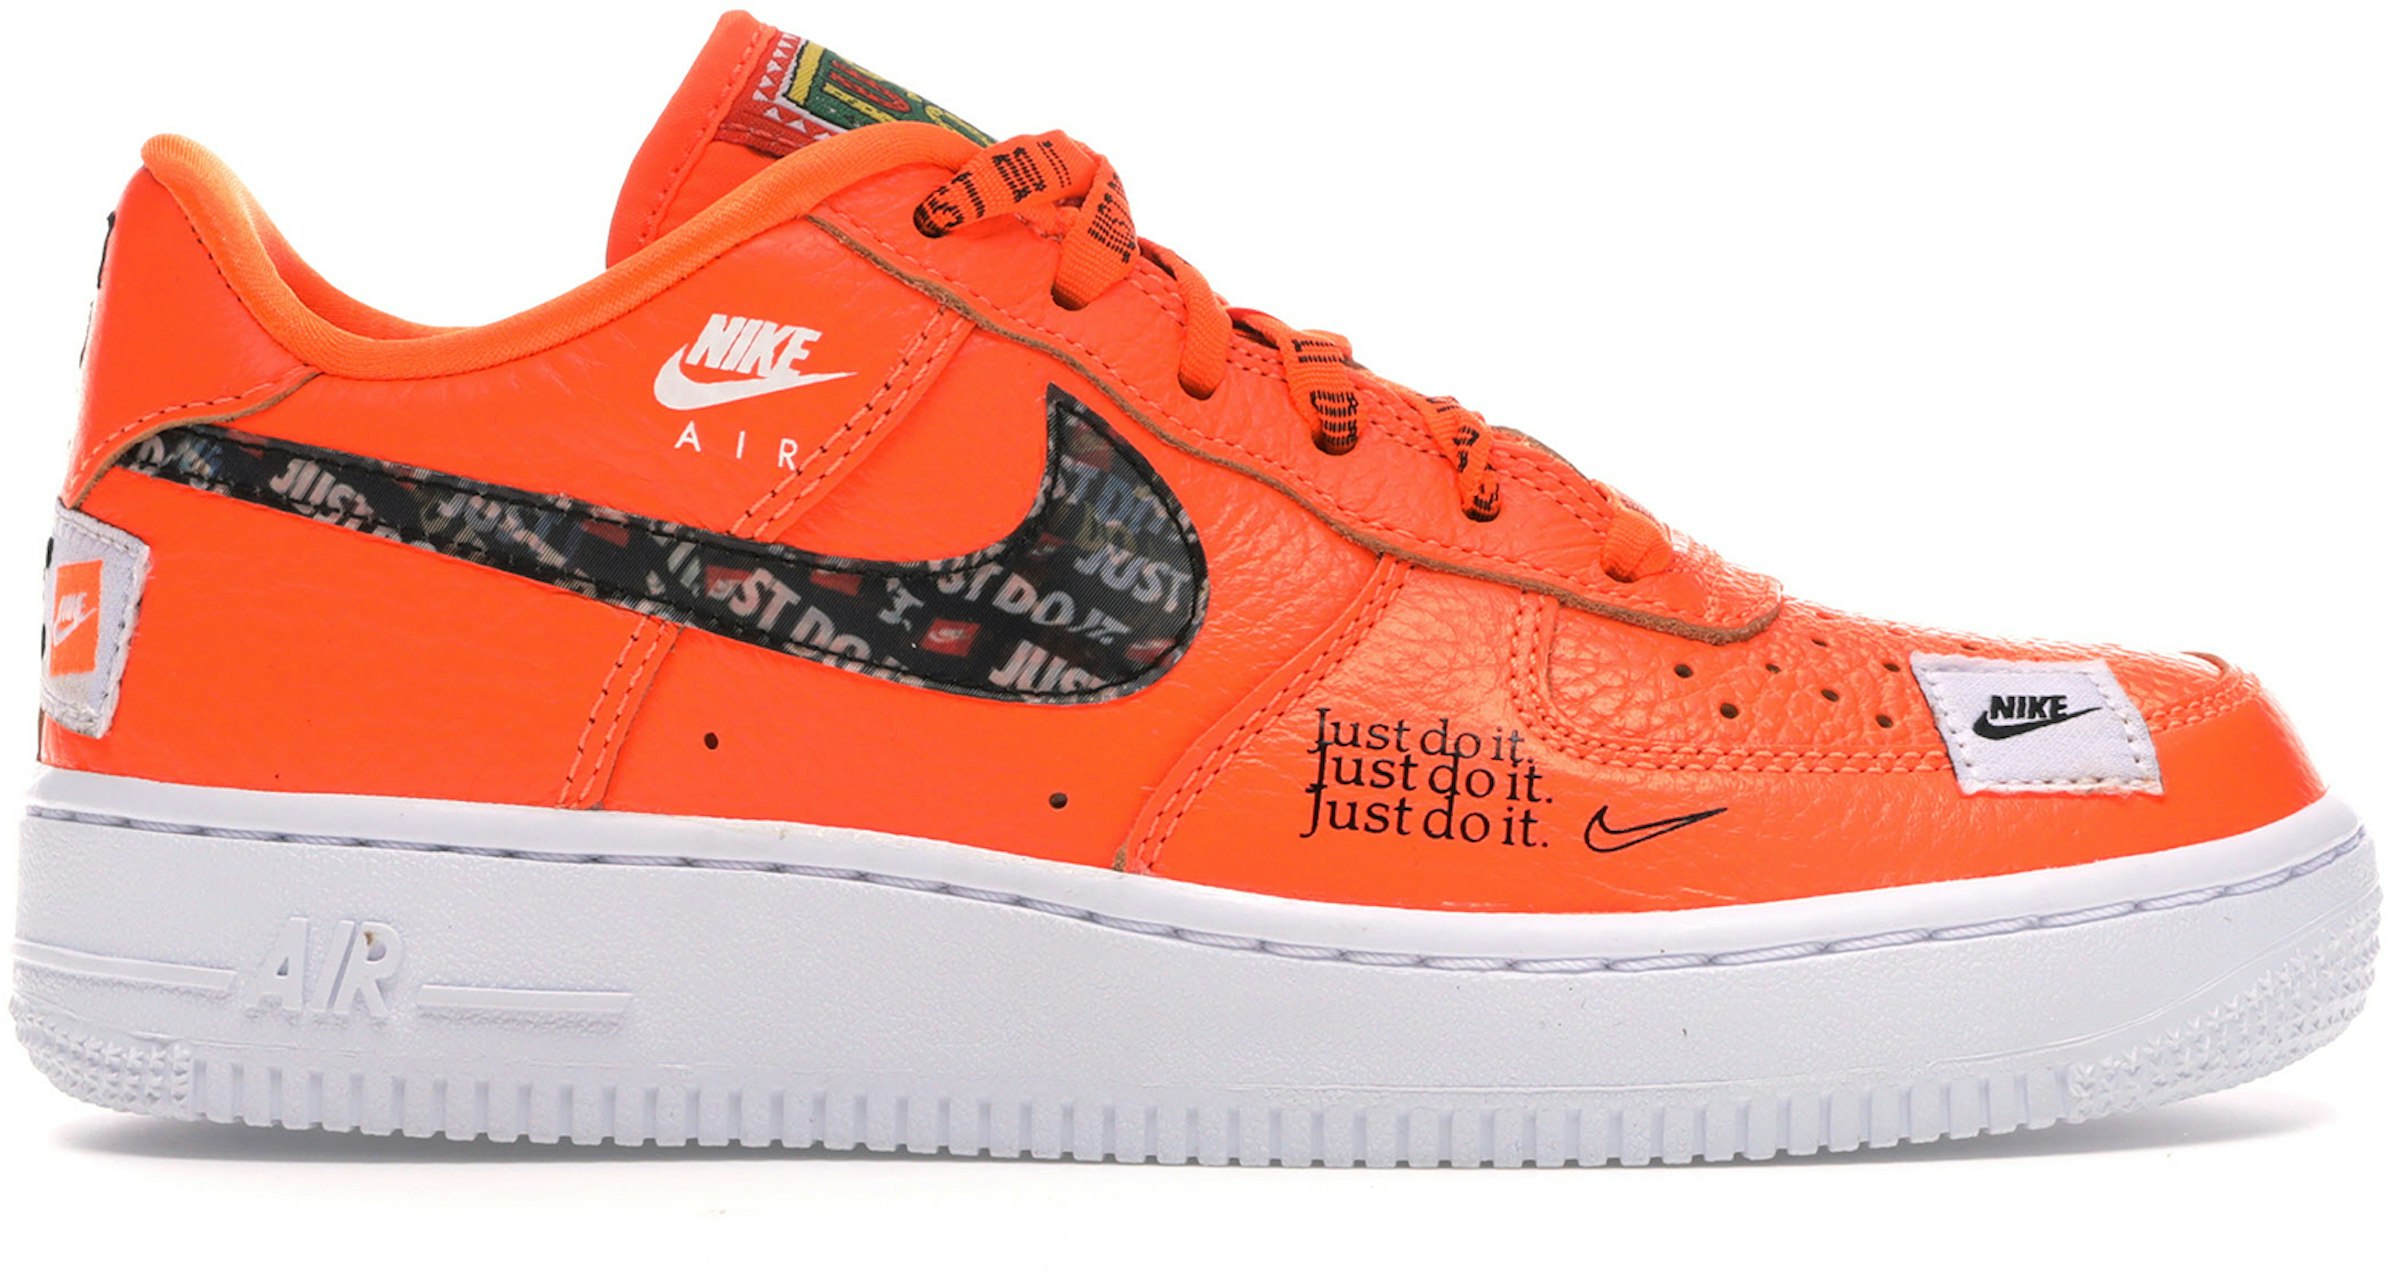 Nike Air Force 1 Low Just Do It Pack (GS) AO3977-800 - US